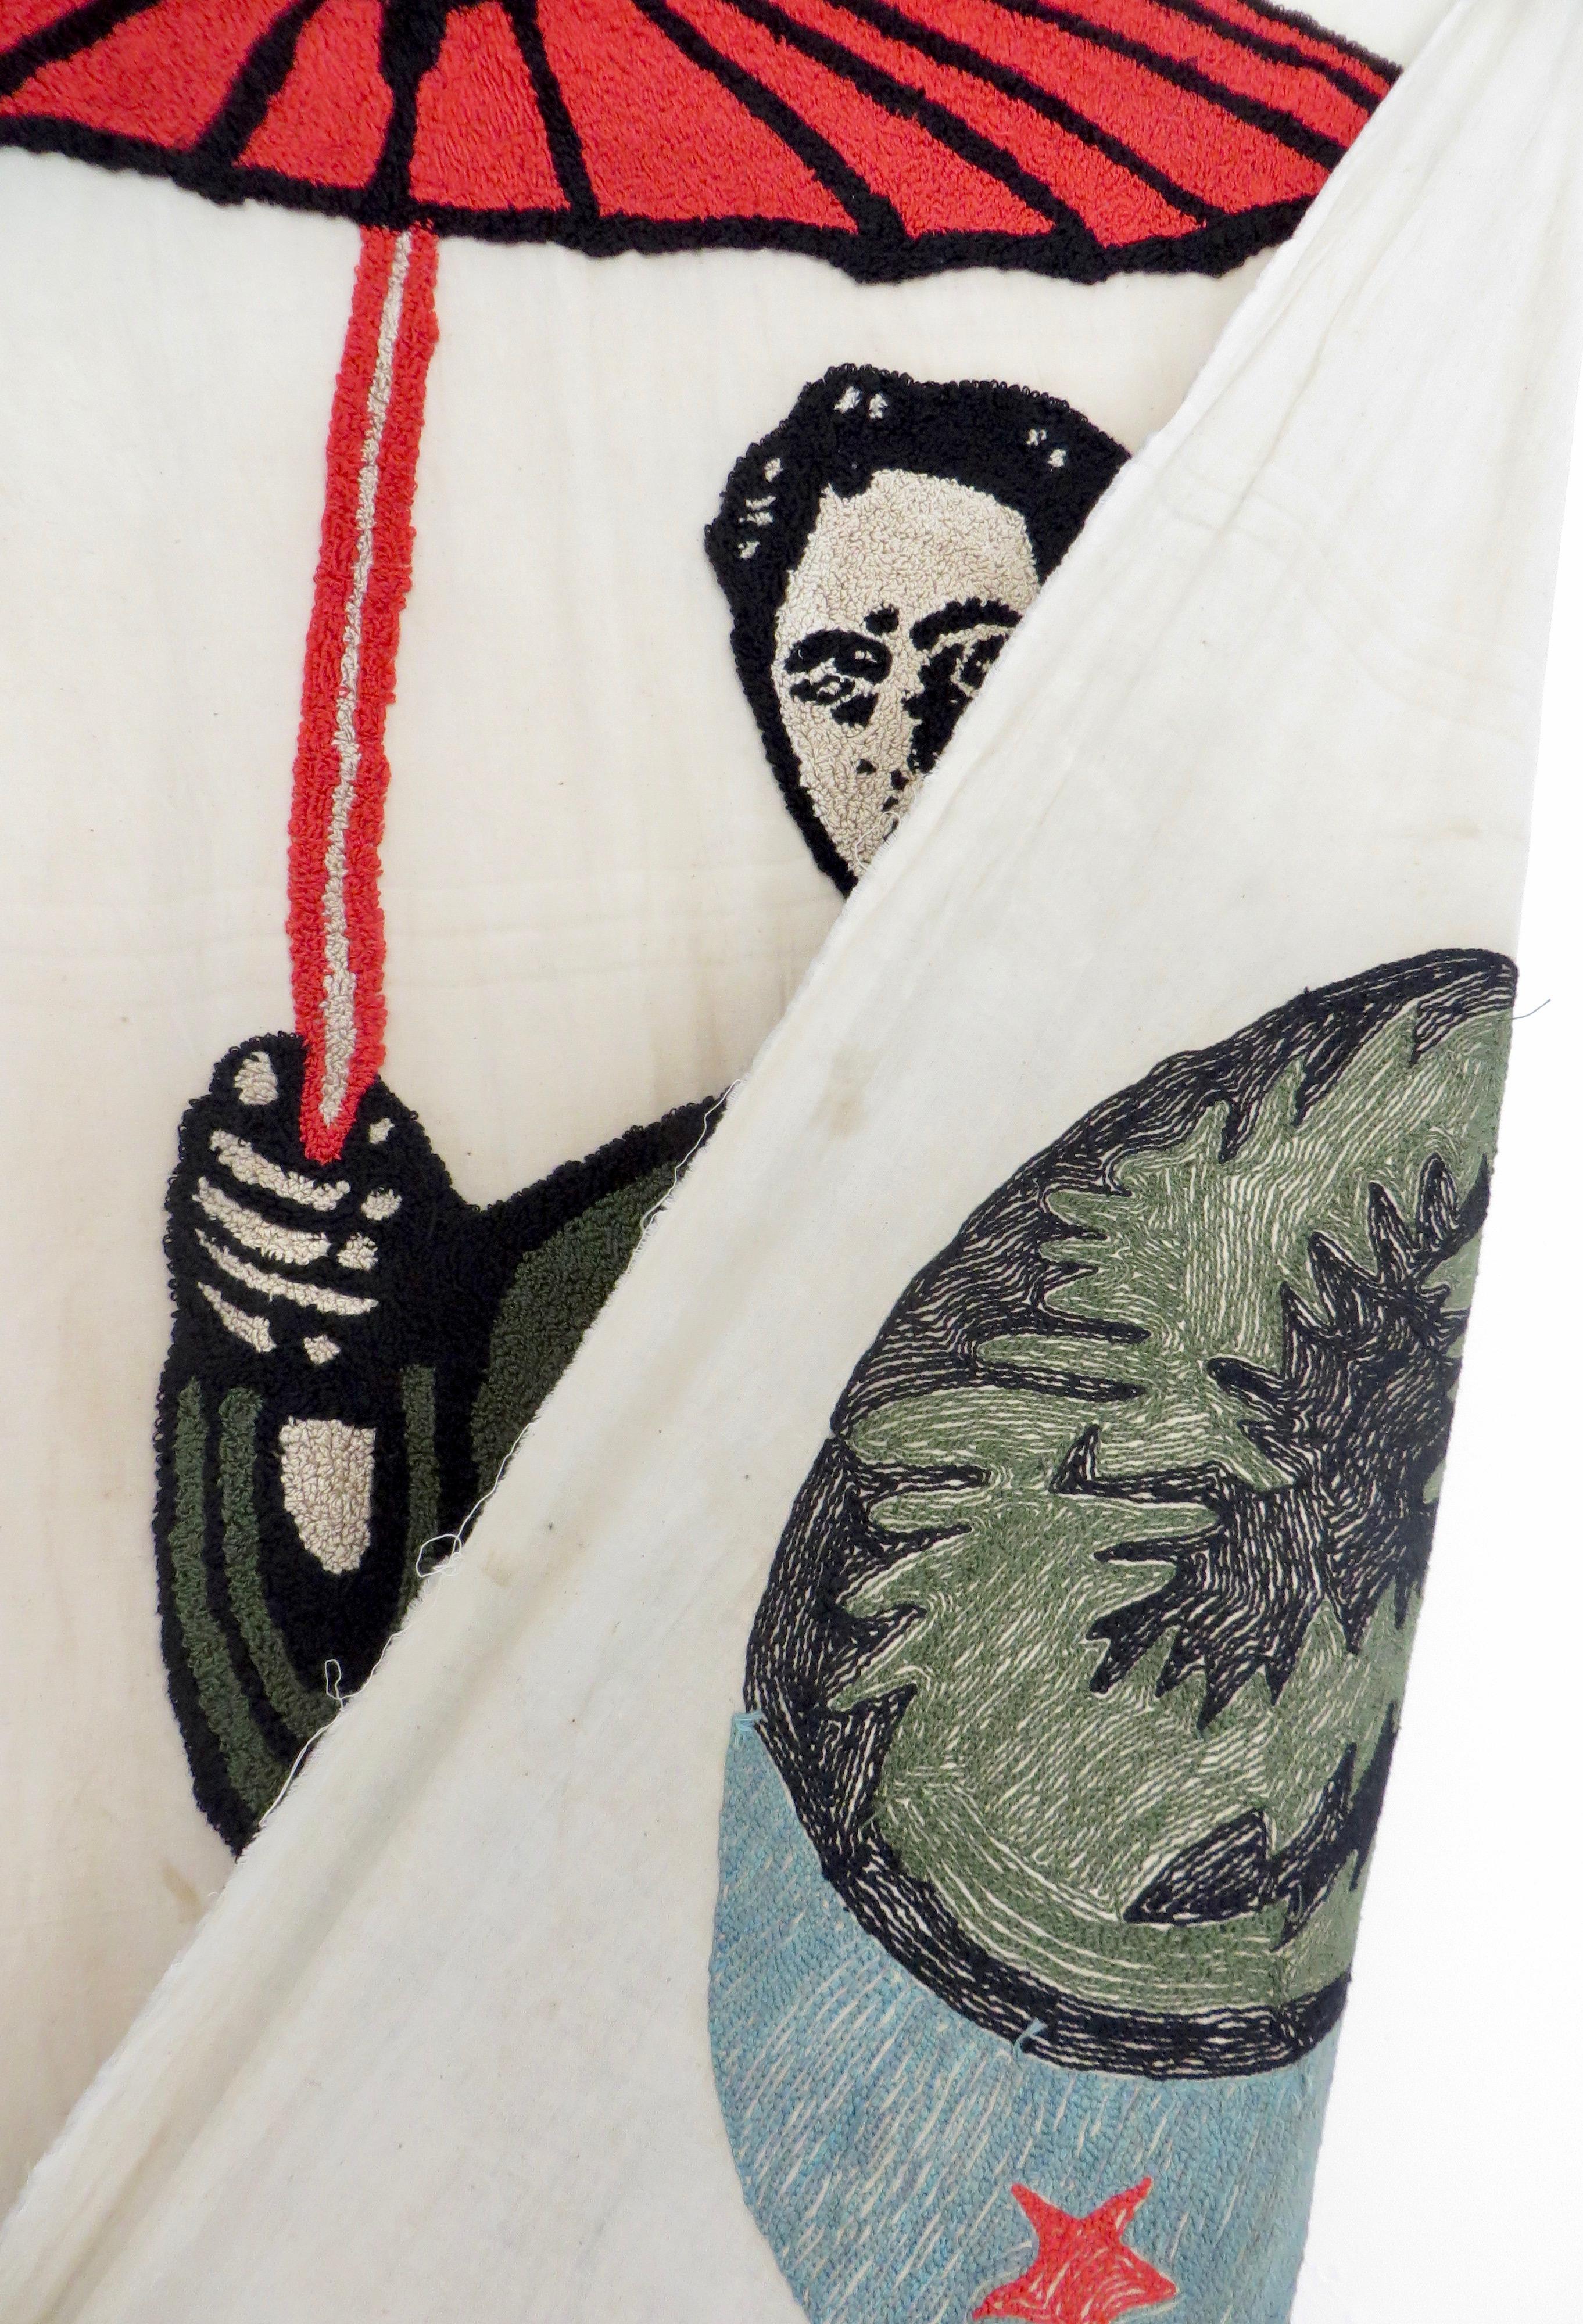 Chinese Mao Zedong Embroidered Textile Banner